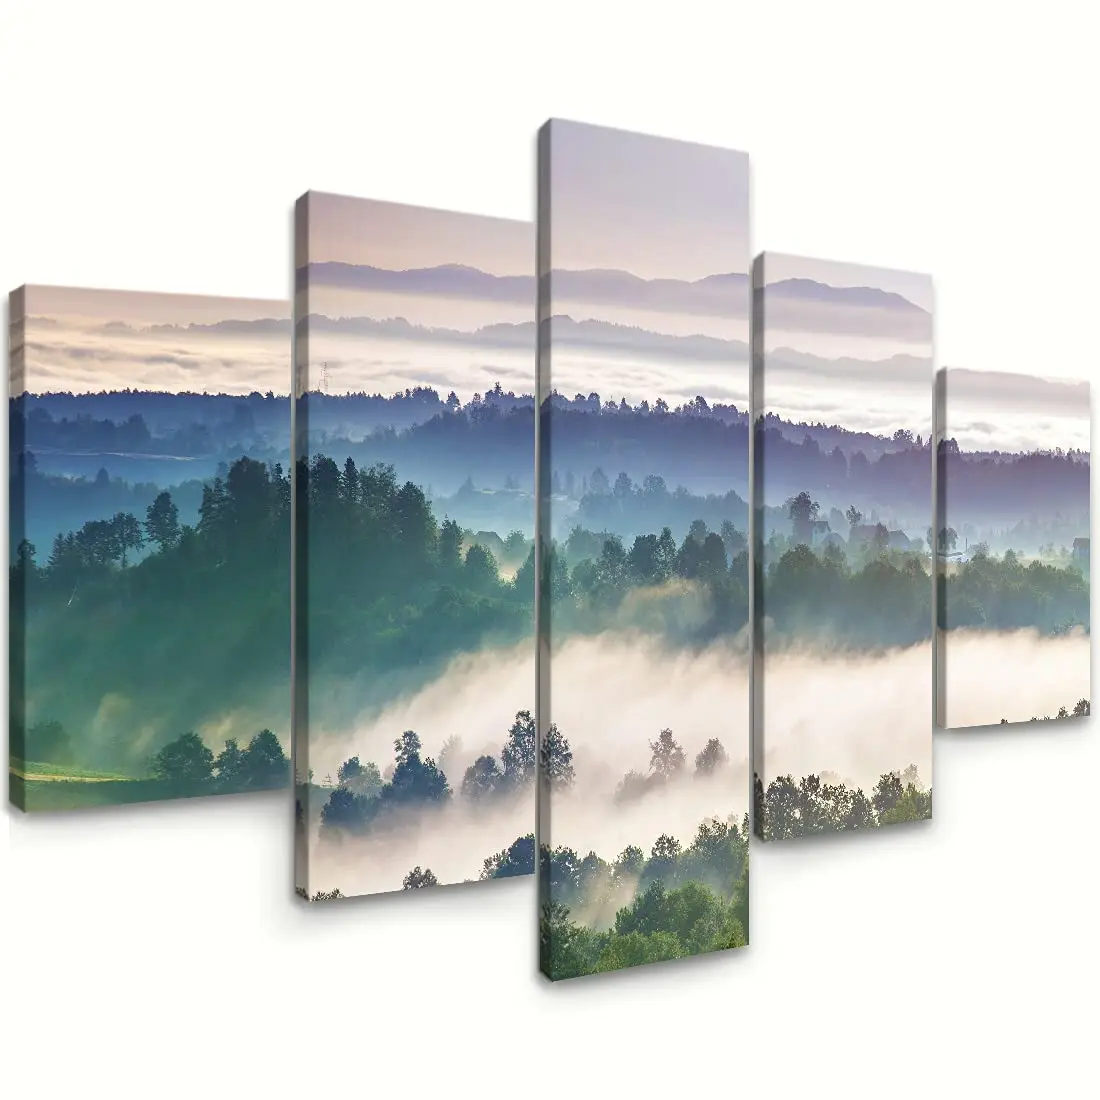 

Modern 5 Panel Large Size Foggy Forest Trees Landscape Artworks Painting Canvas Wall Art Print For Home Living Room Decoration